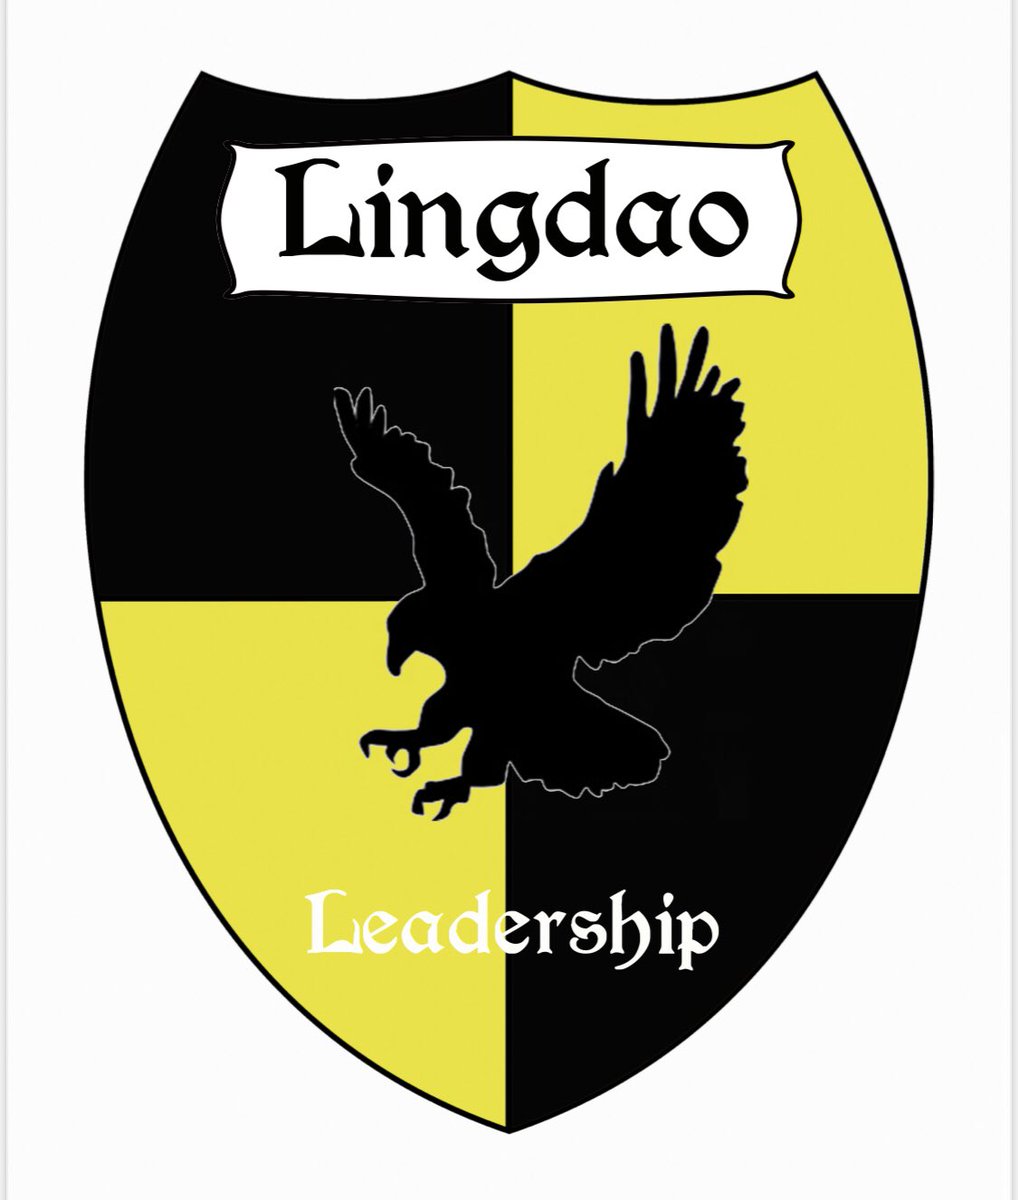 Last but not least in our House System series this week is Lingdao! It is the house of leadership. We asked Kindergartener James to describe why he loves Lingdao. His mom is staff, so he has always been around even before kinder! James says he has been in Lingdao since he was 3!